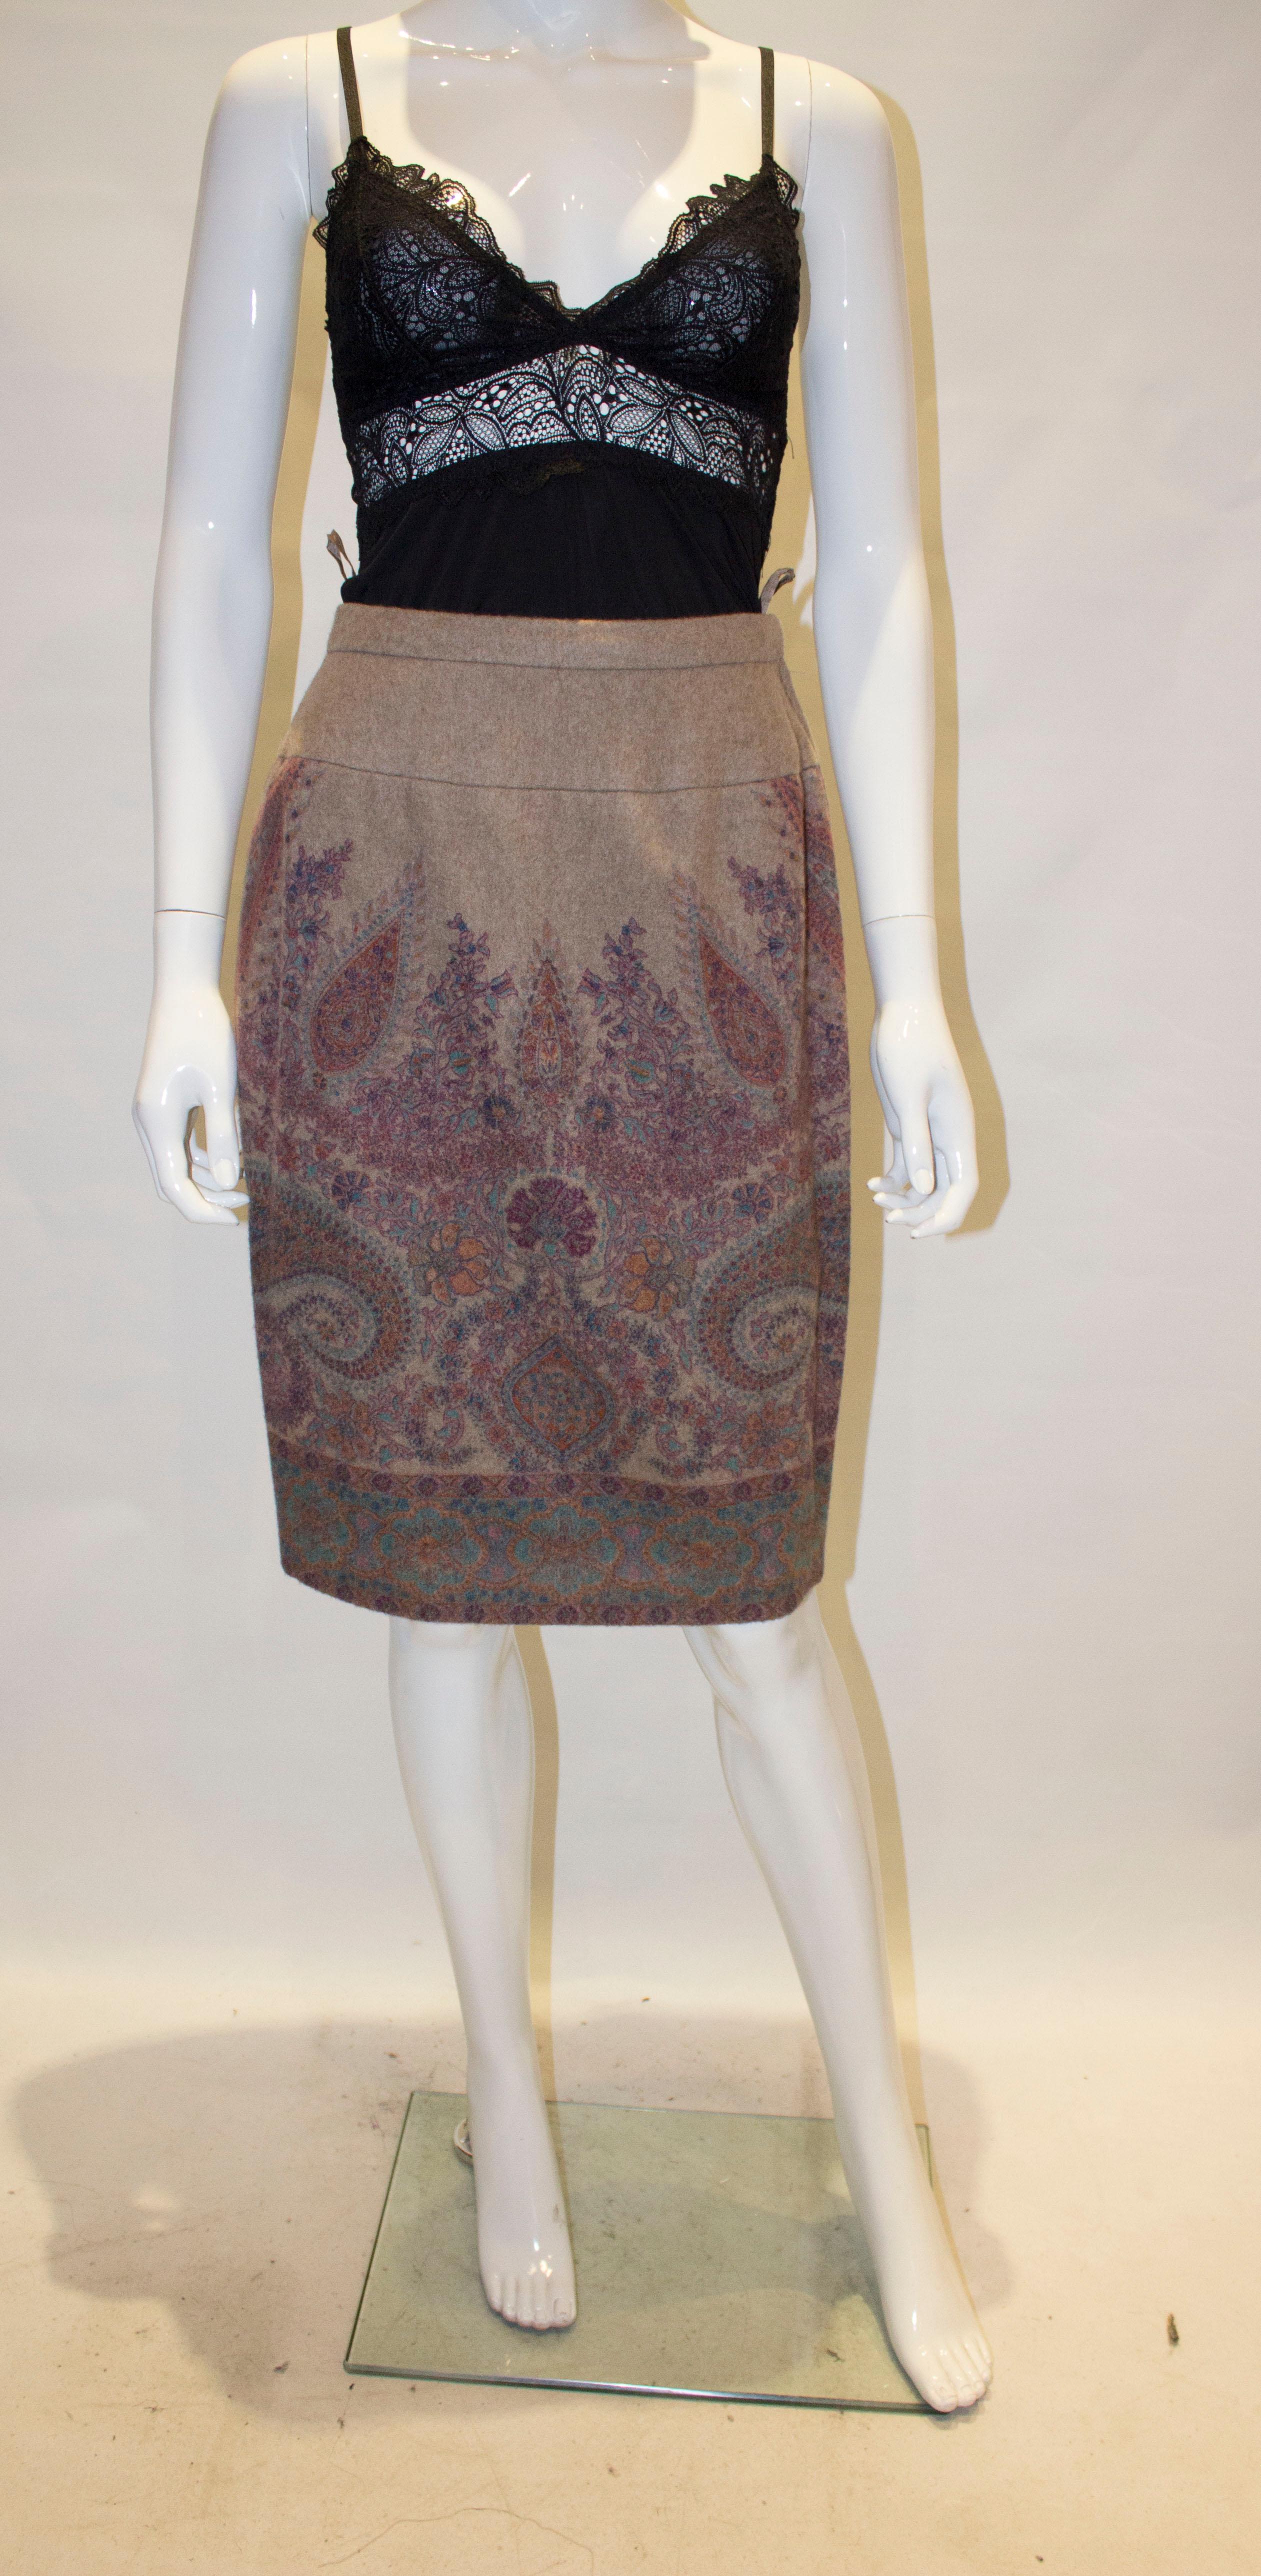 A lovely vintage skirt in biscuit colour cashmere with a pretty paisley design. 
The skirt is fully lined